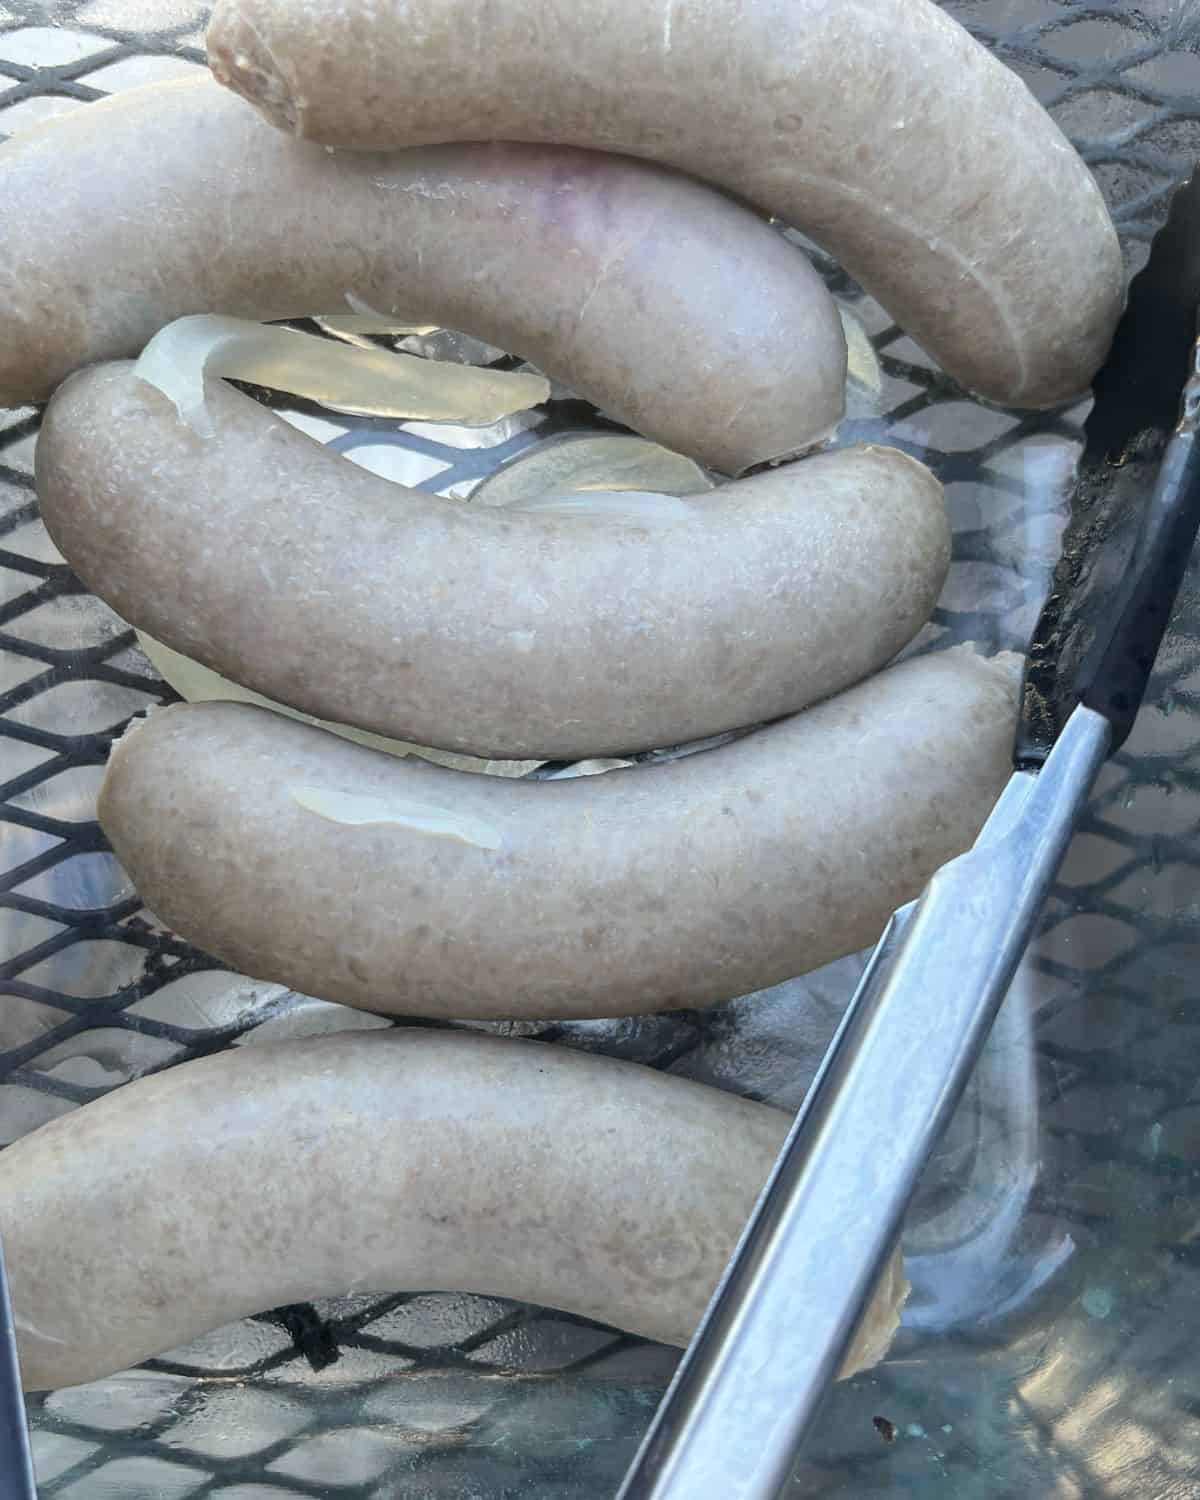 Reserved beer brats ready for grill. 